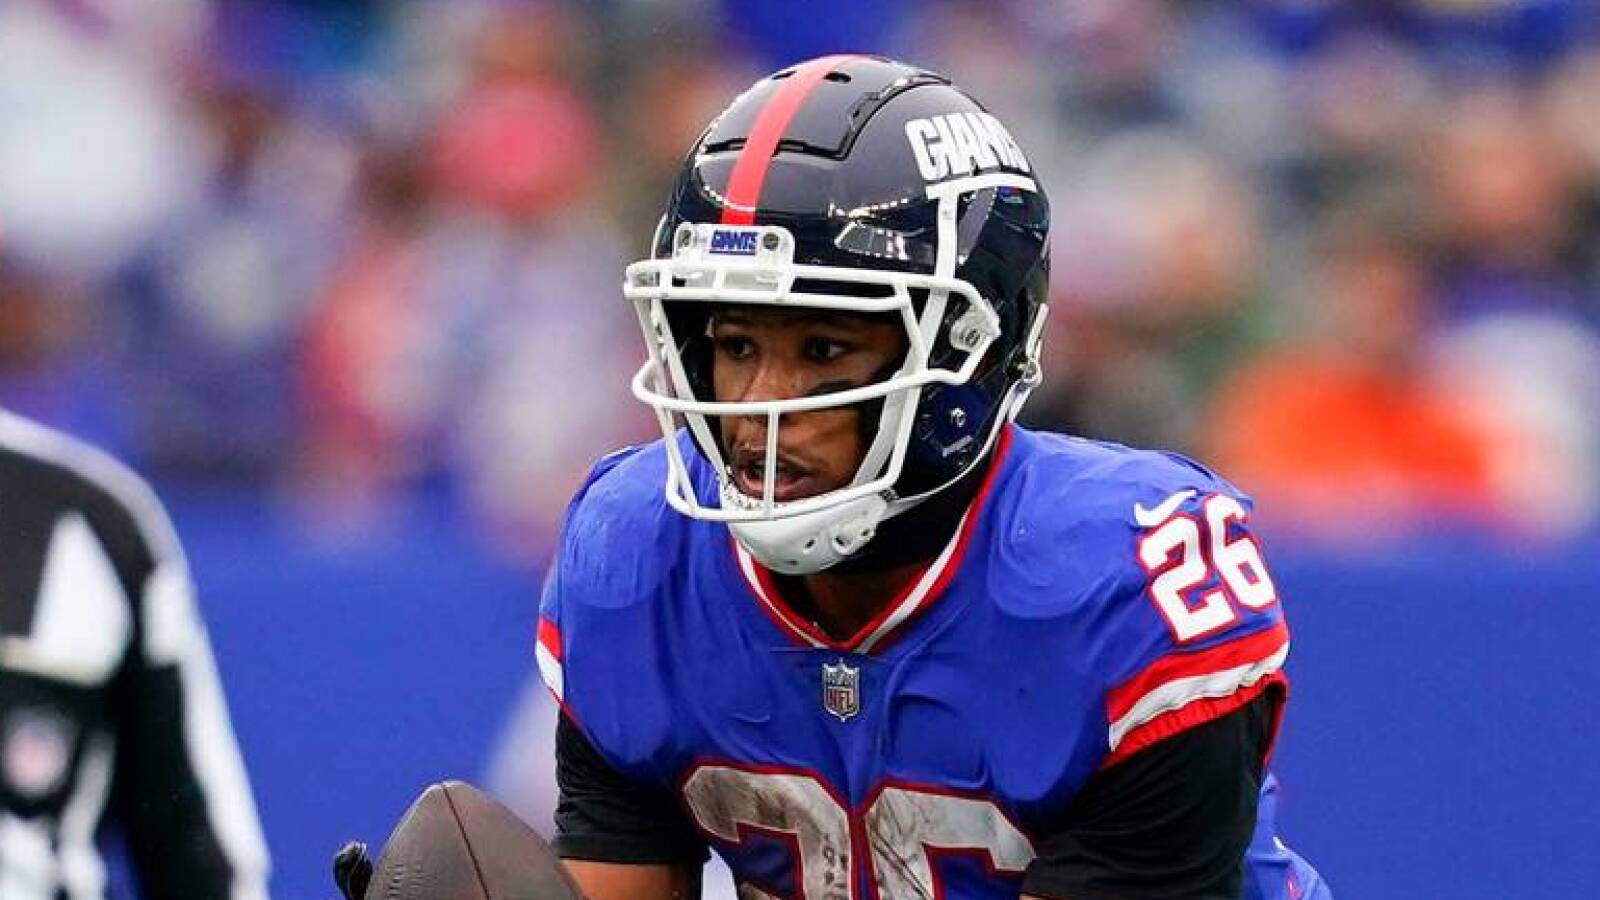 Insider: Giants trading Saquon Barkley this fall would be 'ridiculous'